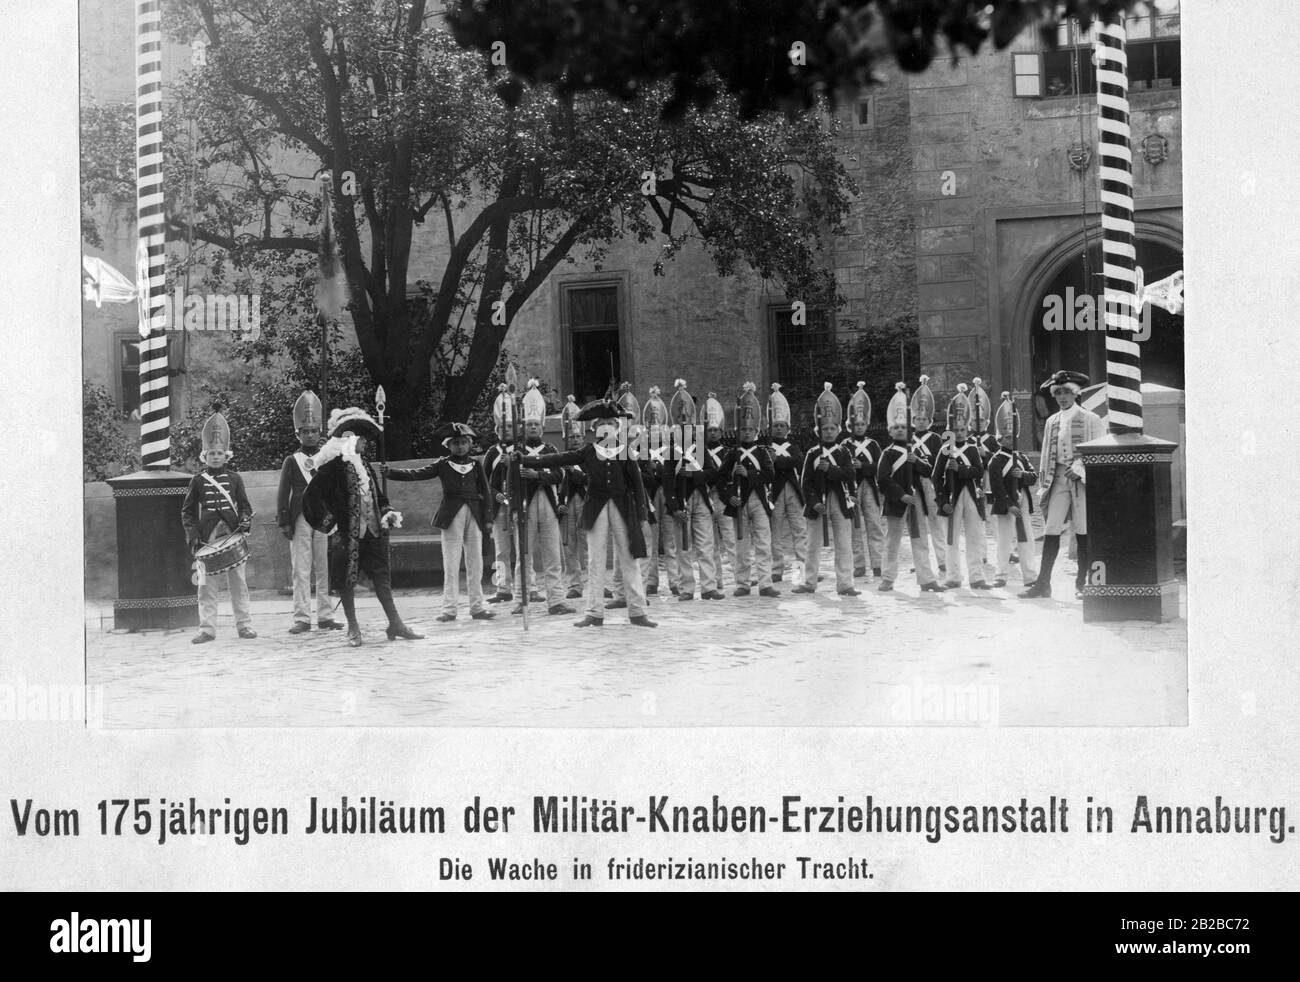 At the 175th anniversary of the Militaer-Knaben-Erziehungsanstalt (military youth institute) in Annaburg, the young pupils stand guard in traditional Frederician costume. Most of the teachers and commanders were retired officers who taught the youngsters order and obedience as well as Spartan modesty. Stock Photo